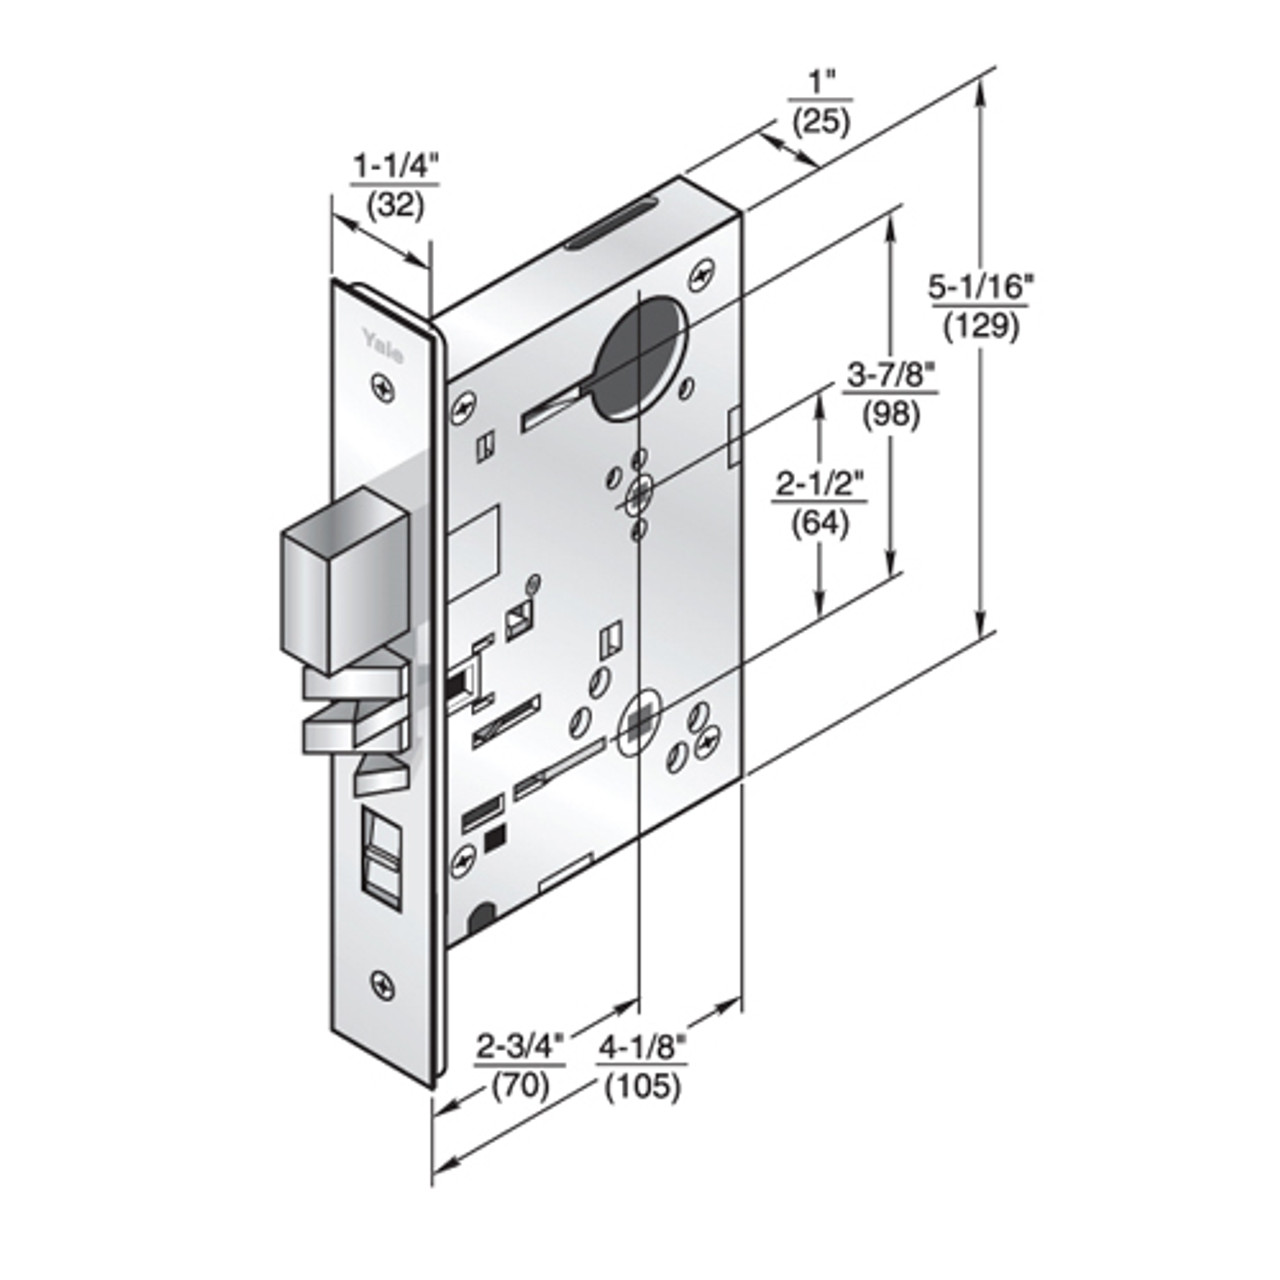 JNR8833FL-619 Yale 8800FL Series Single Cylinder Mortise Exit Locks with Jefferson Lever in Satin Nickel